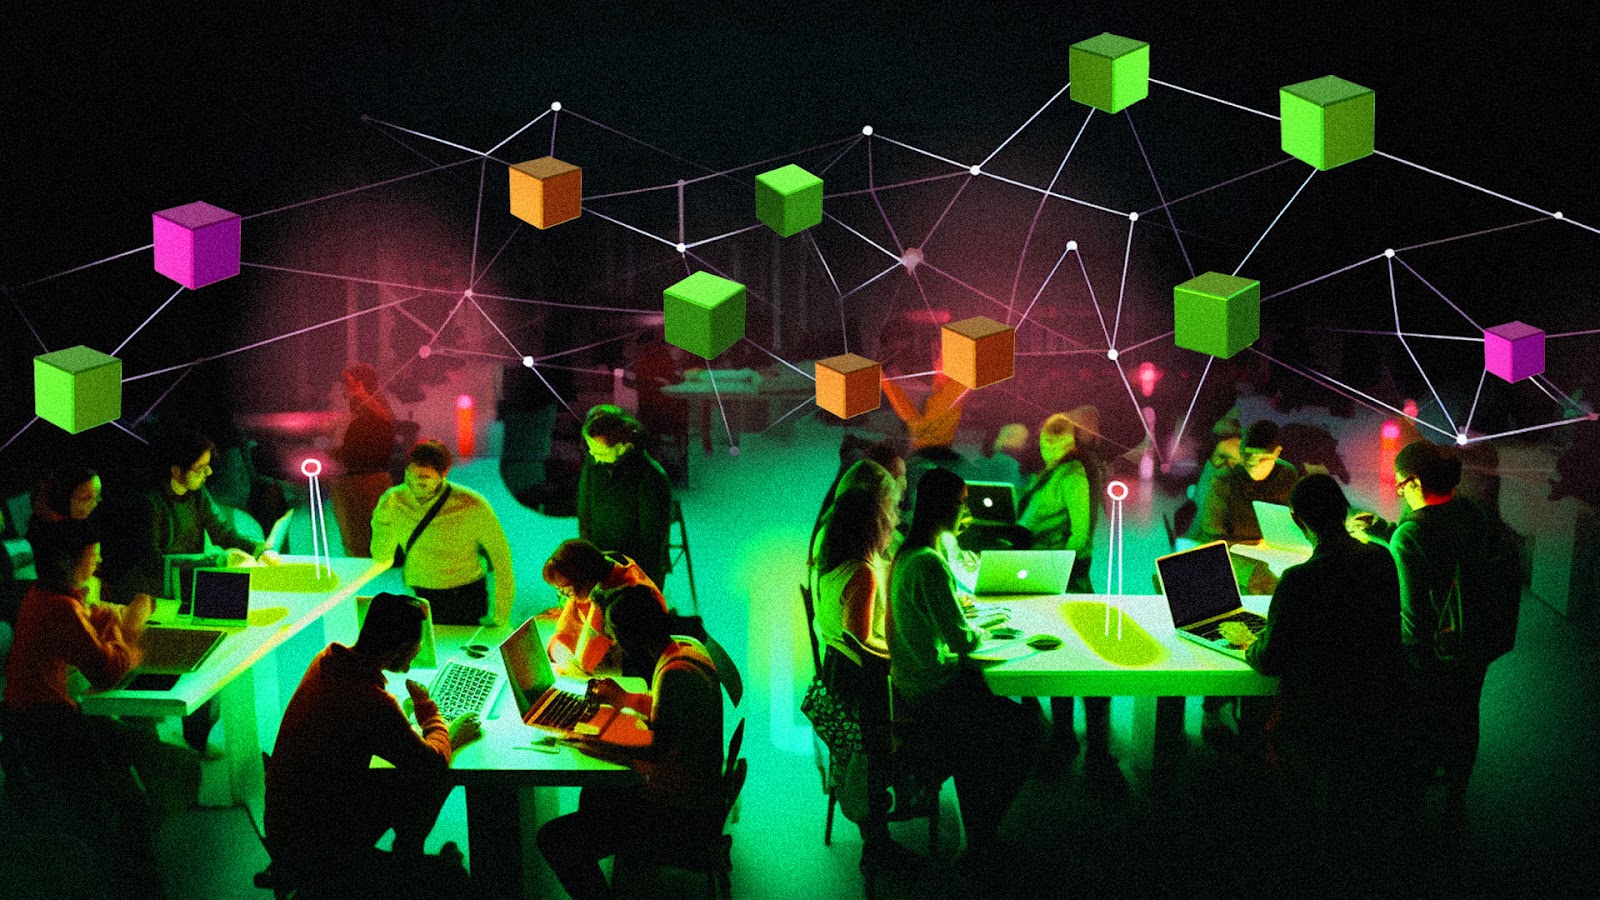 What Are Hackathons? The Importance of Hackathons and Community Events